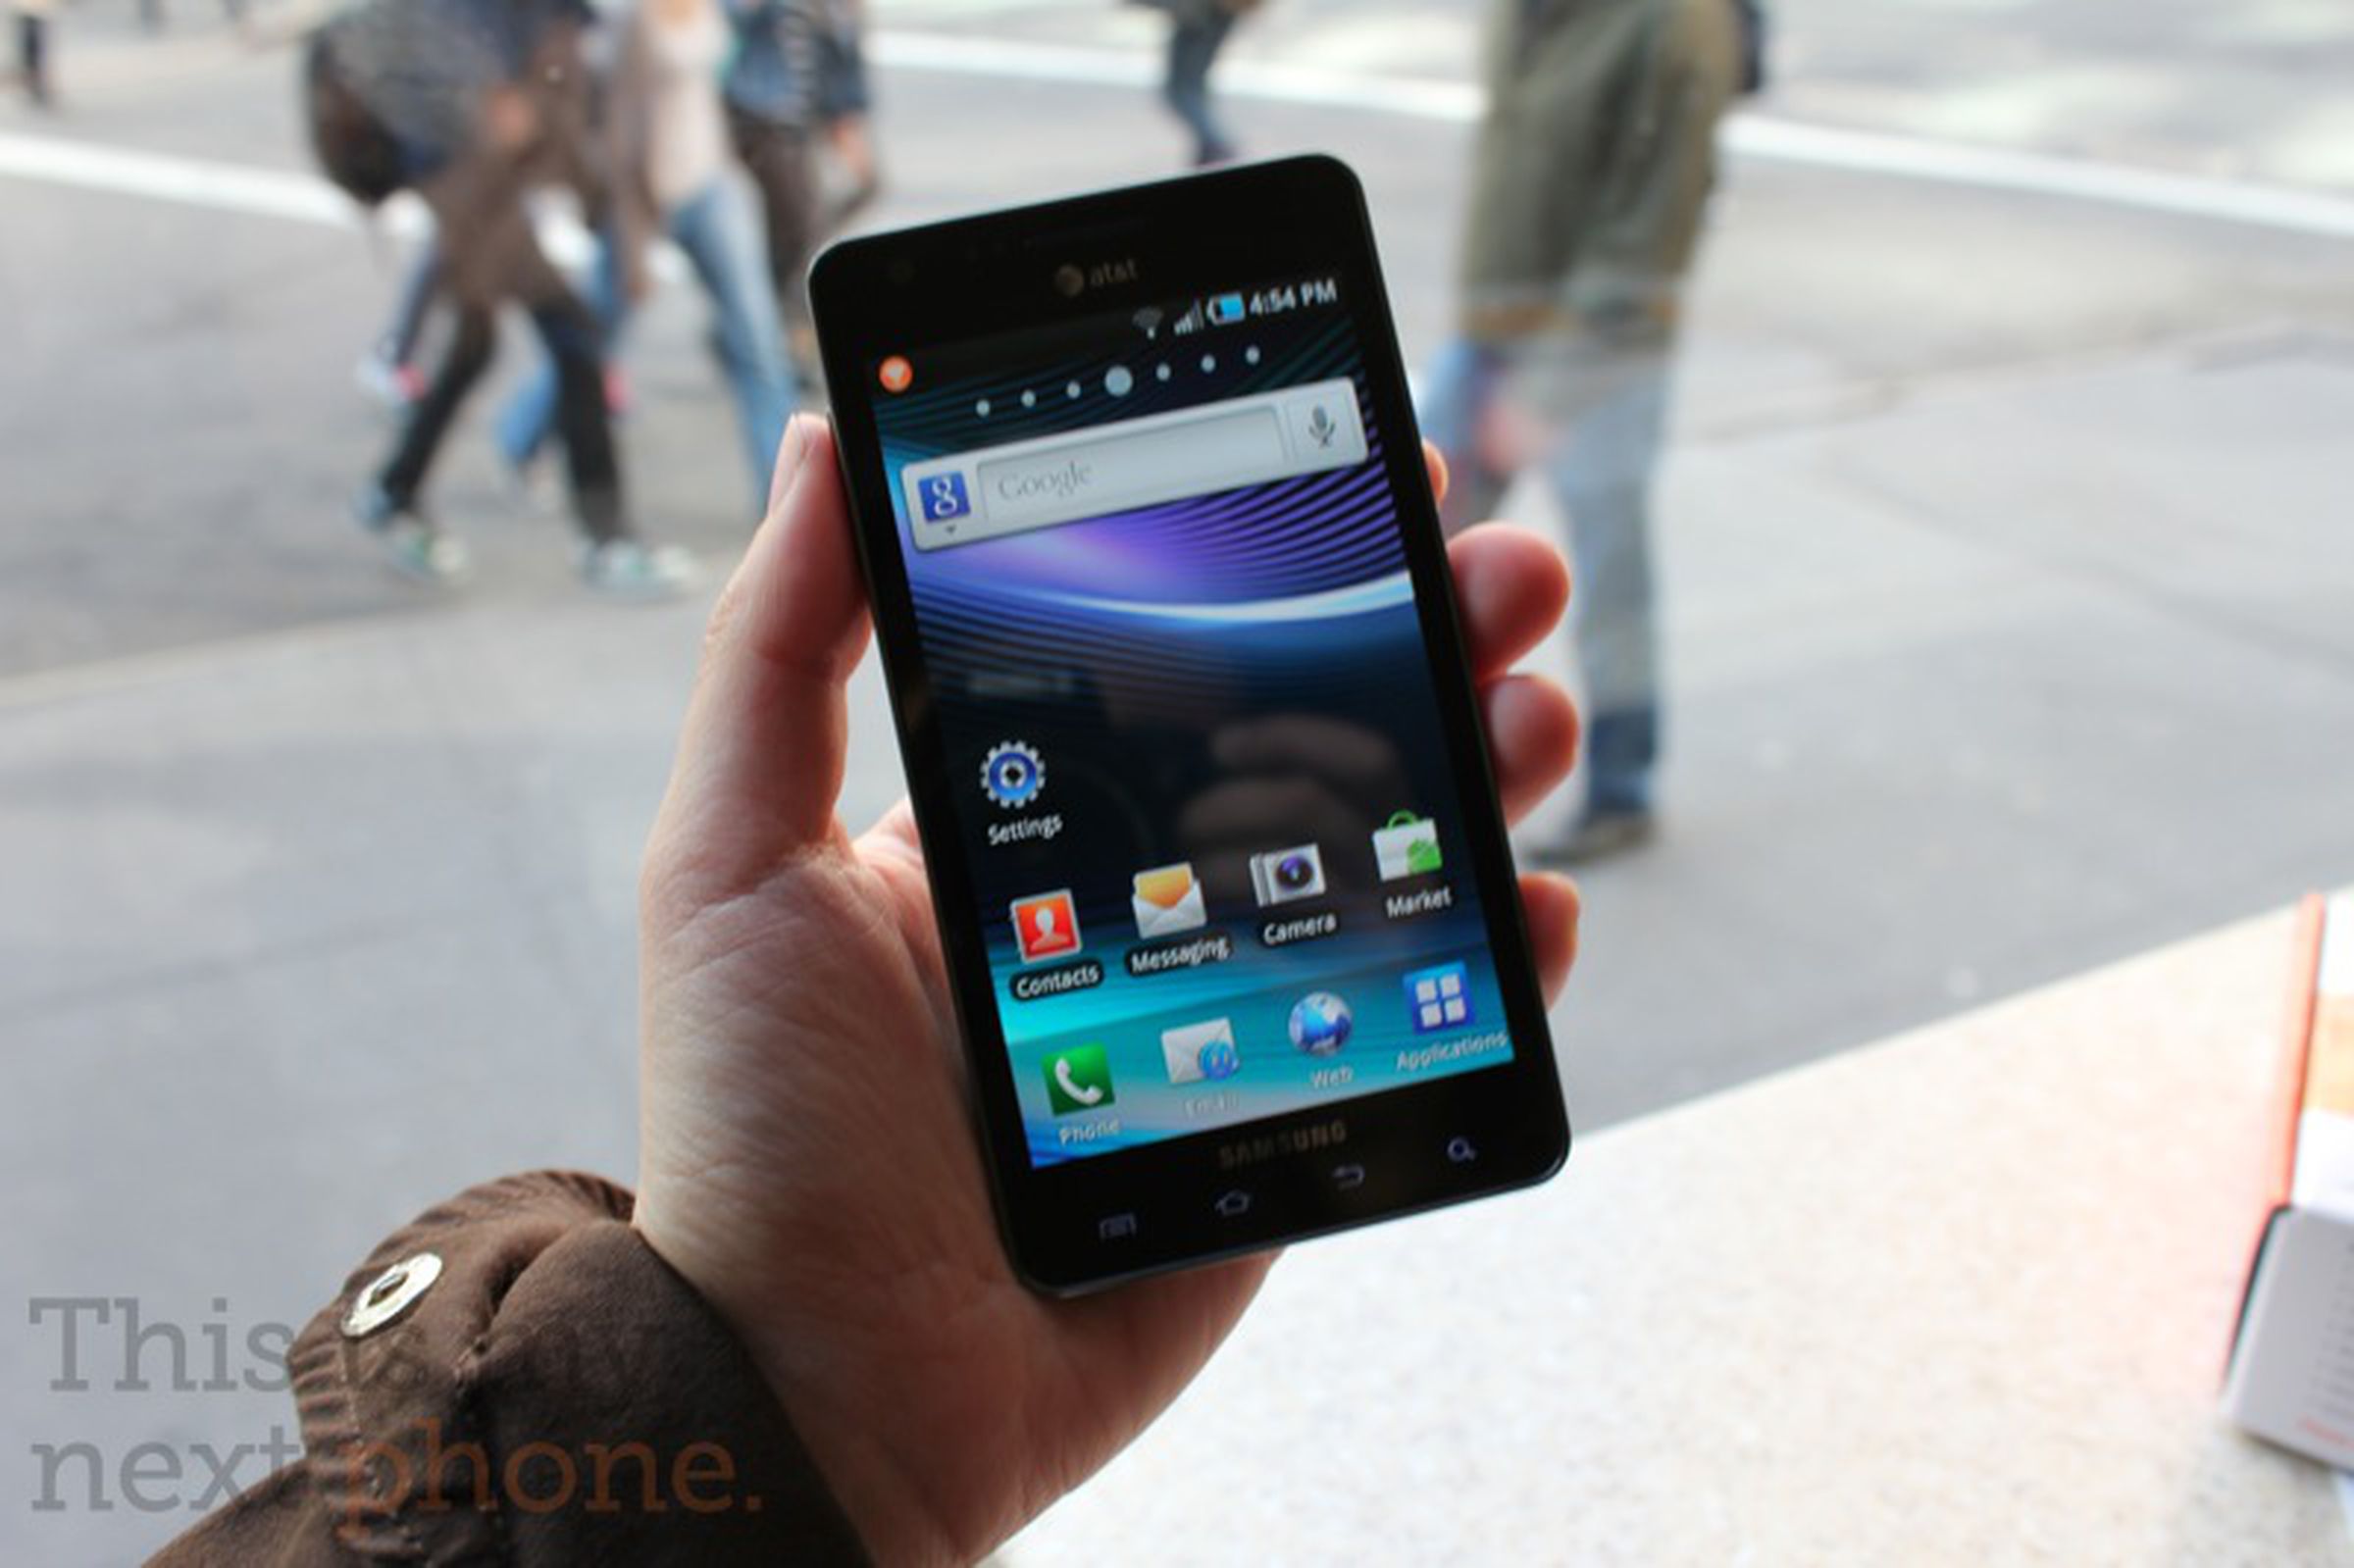 Samsung Infuse 4G for AT&T: unboxing and hands-on